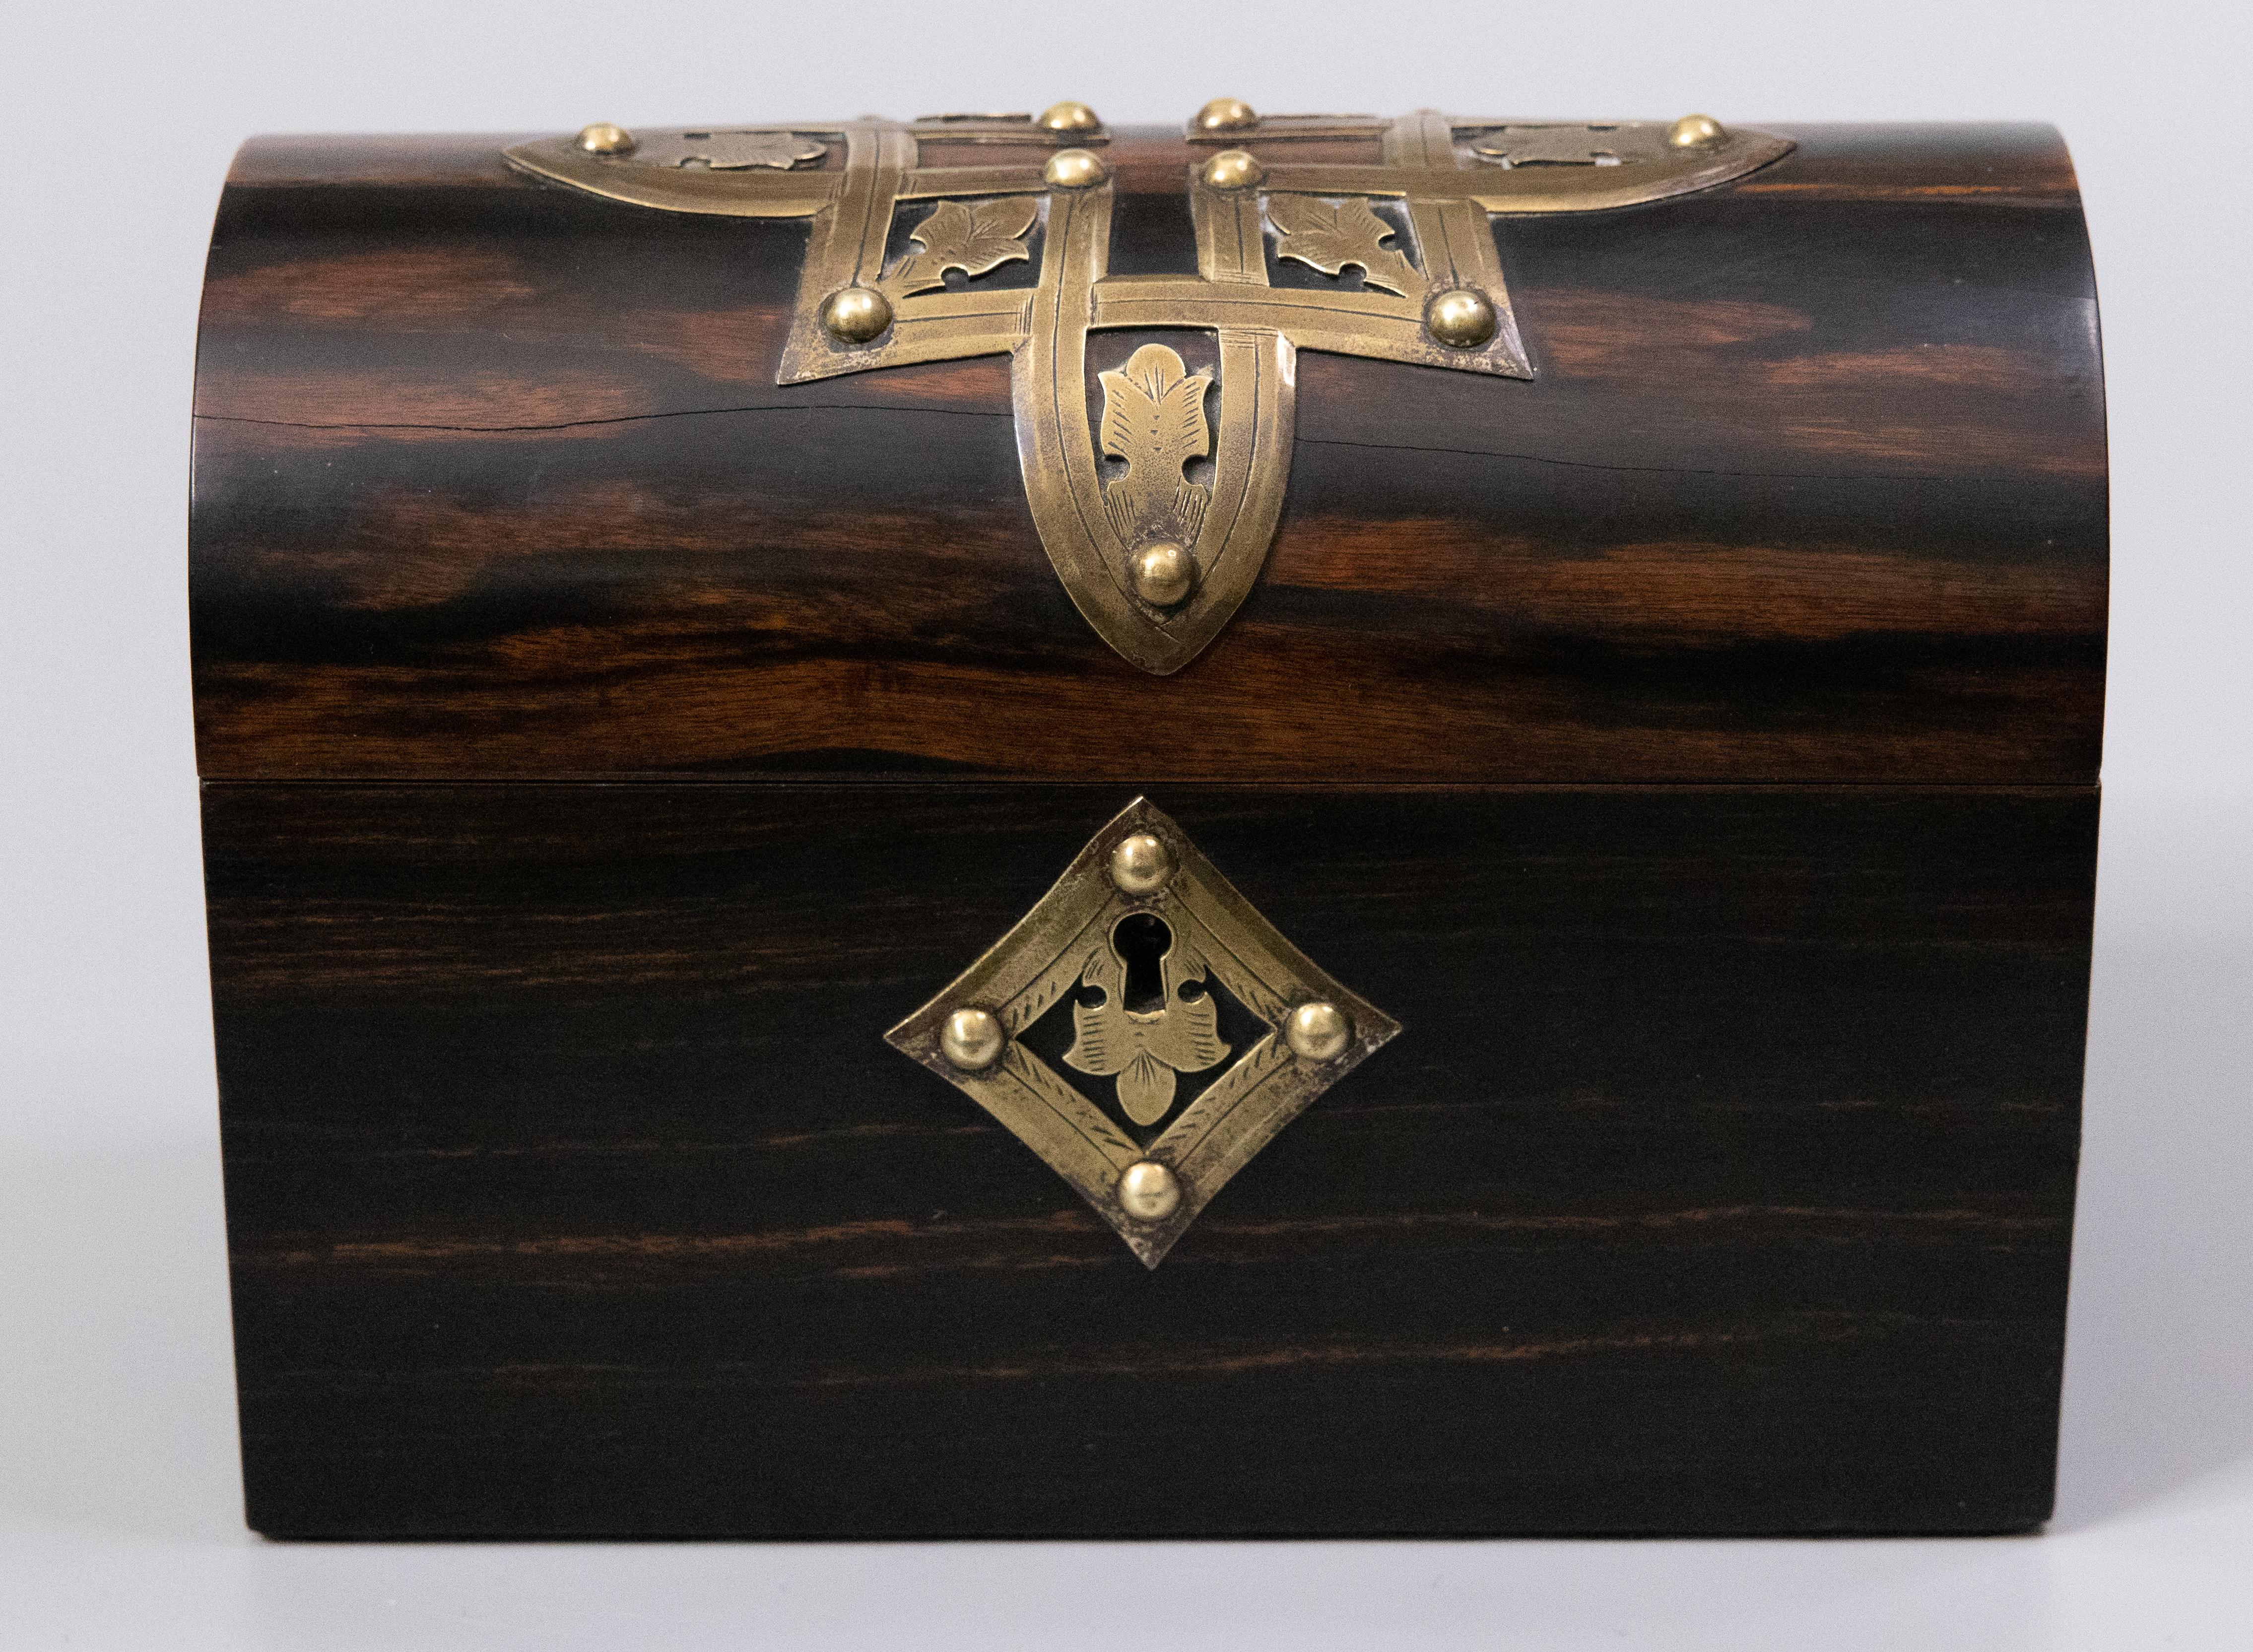 A superb antique English coromandel domed box with ornate brass mounts, circa 1870. This fine quality box is made of coromandel, a rare kind of ebony wood from Madagascar, highly sought after! The inner lid retains the original blue satin and the